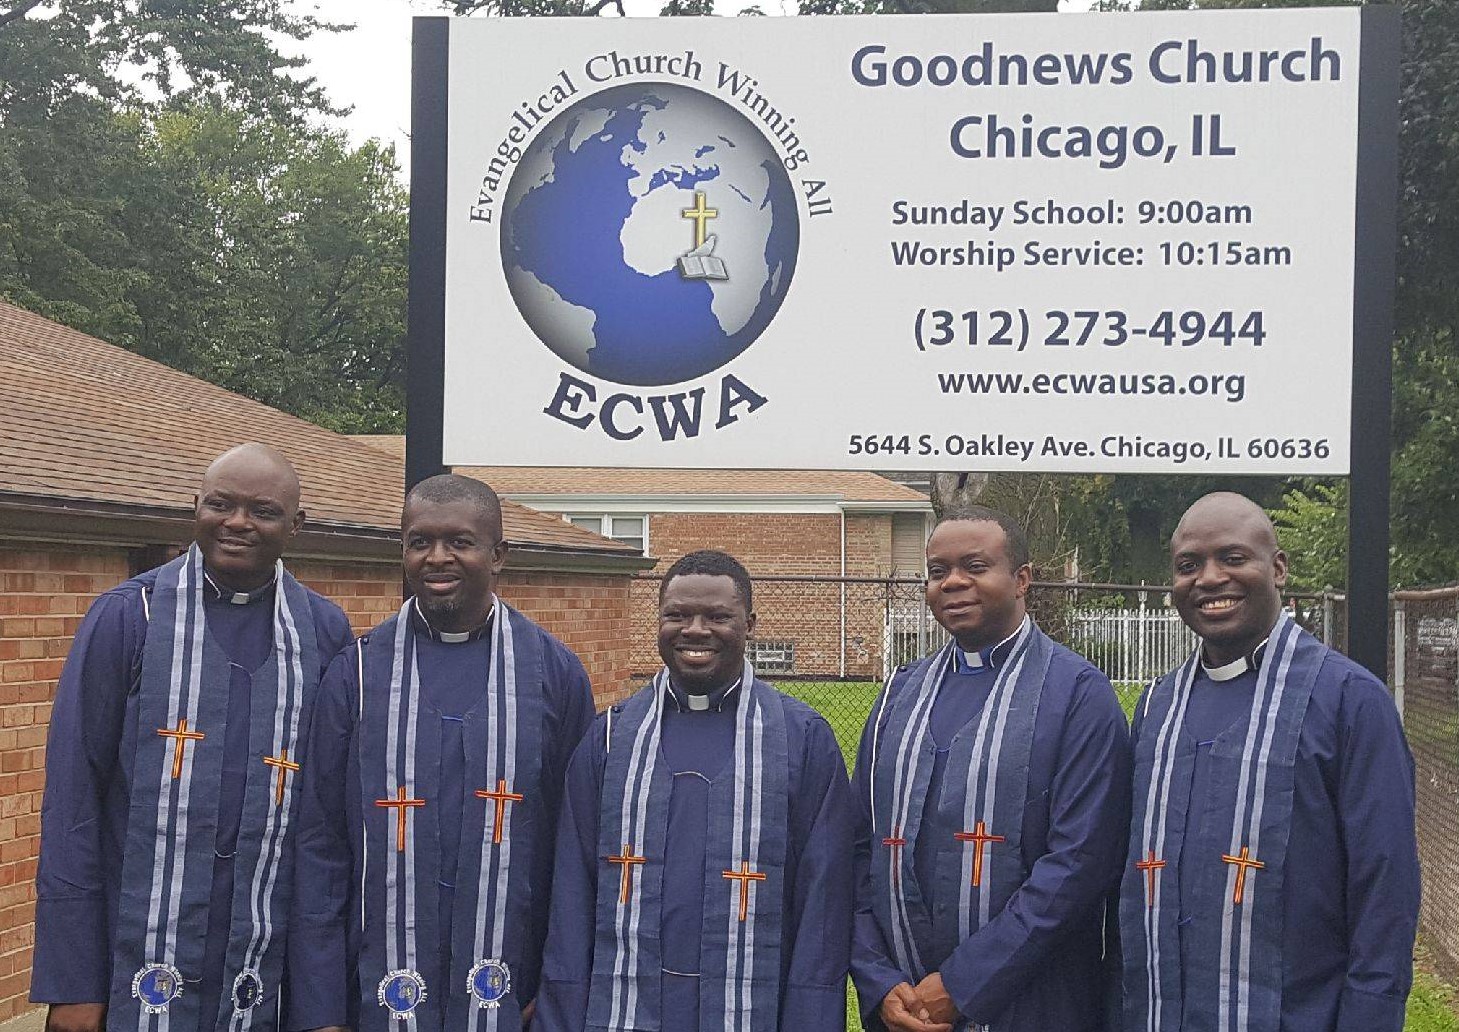 Five New ECWA Ministers Ordained at the ECWA Goodnews Church in Chicago, IL, USA